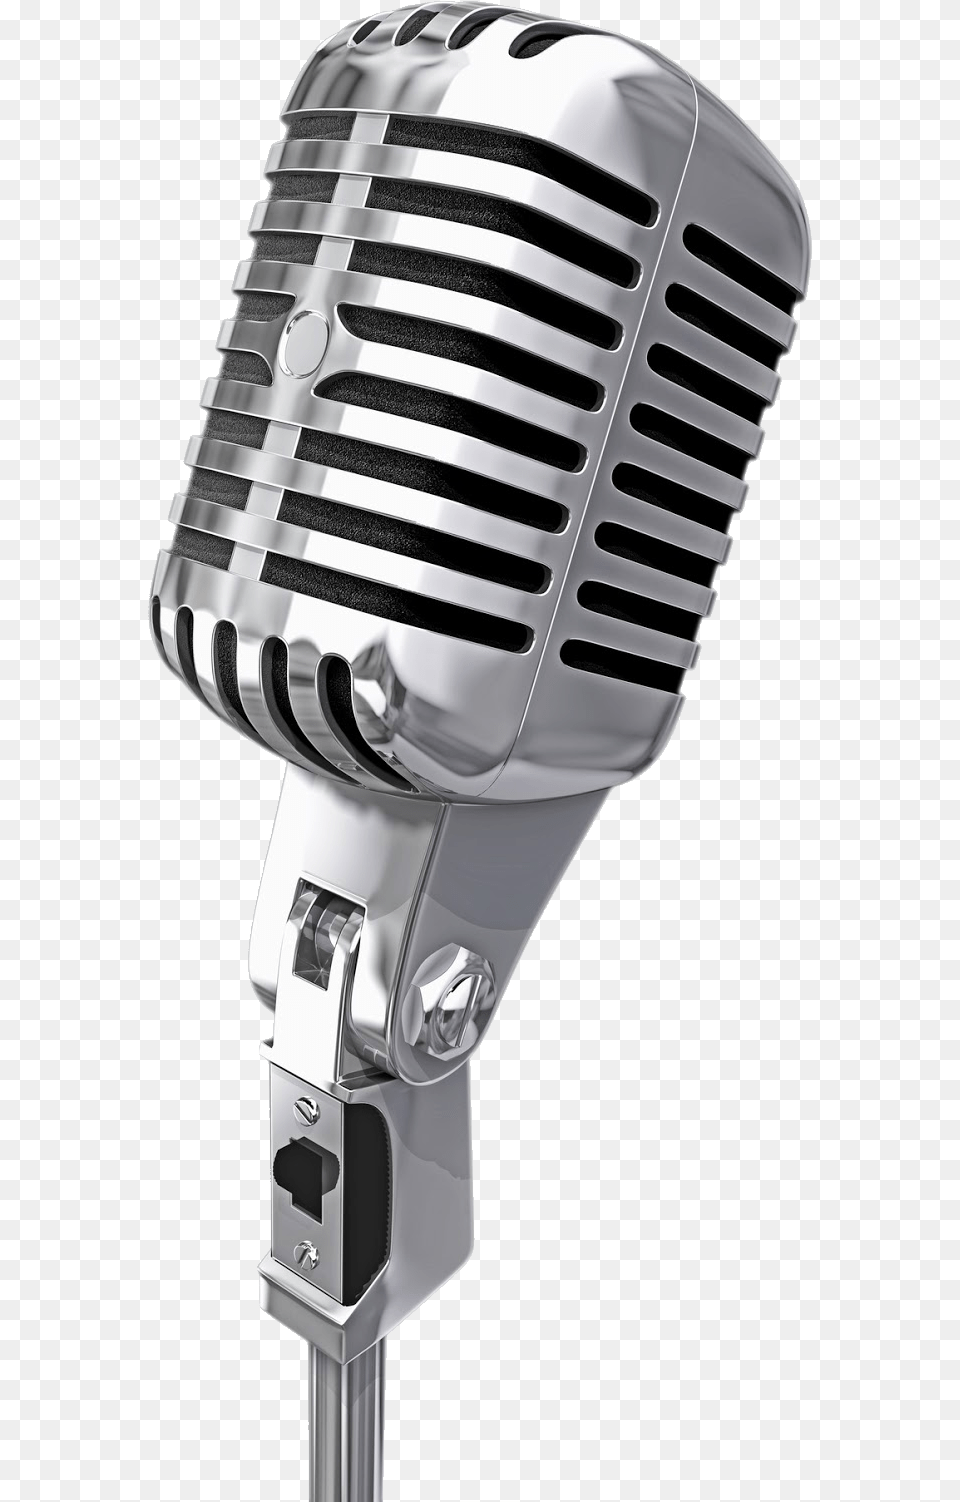 Mic, Electrical Device, Microphone, Appliance, Blow Dryer Png Image